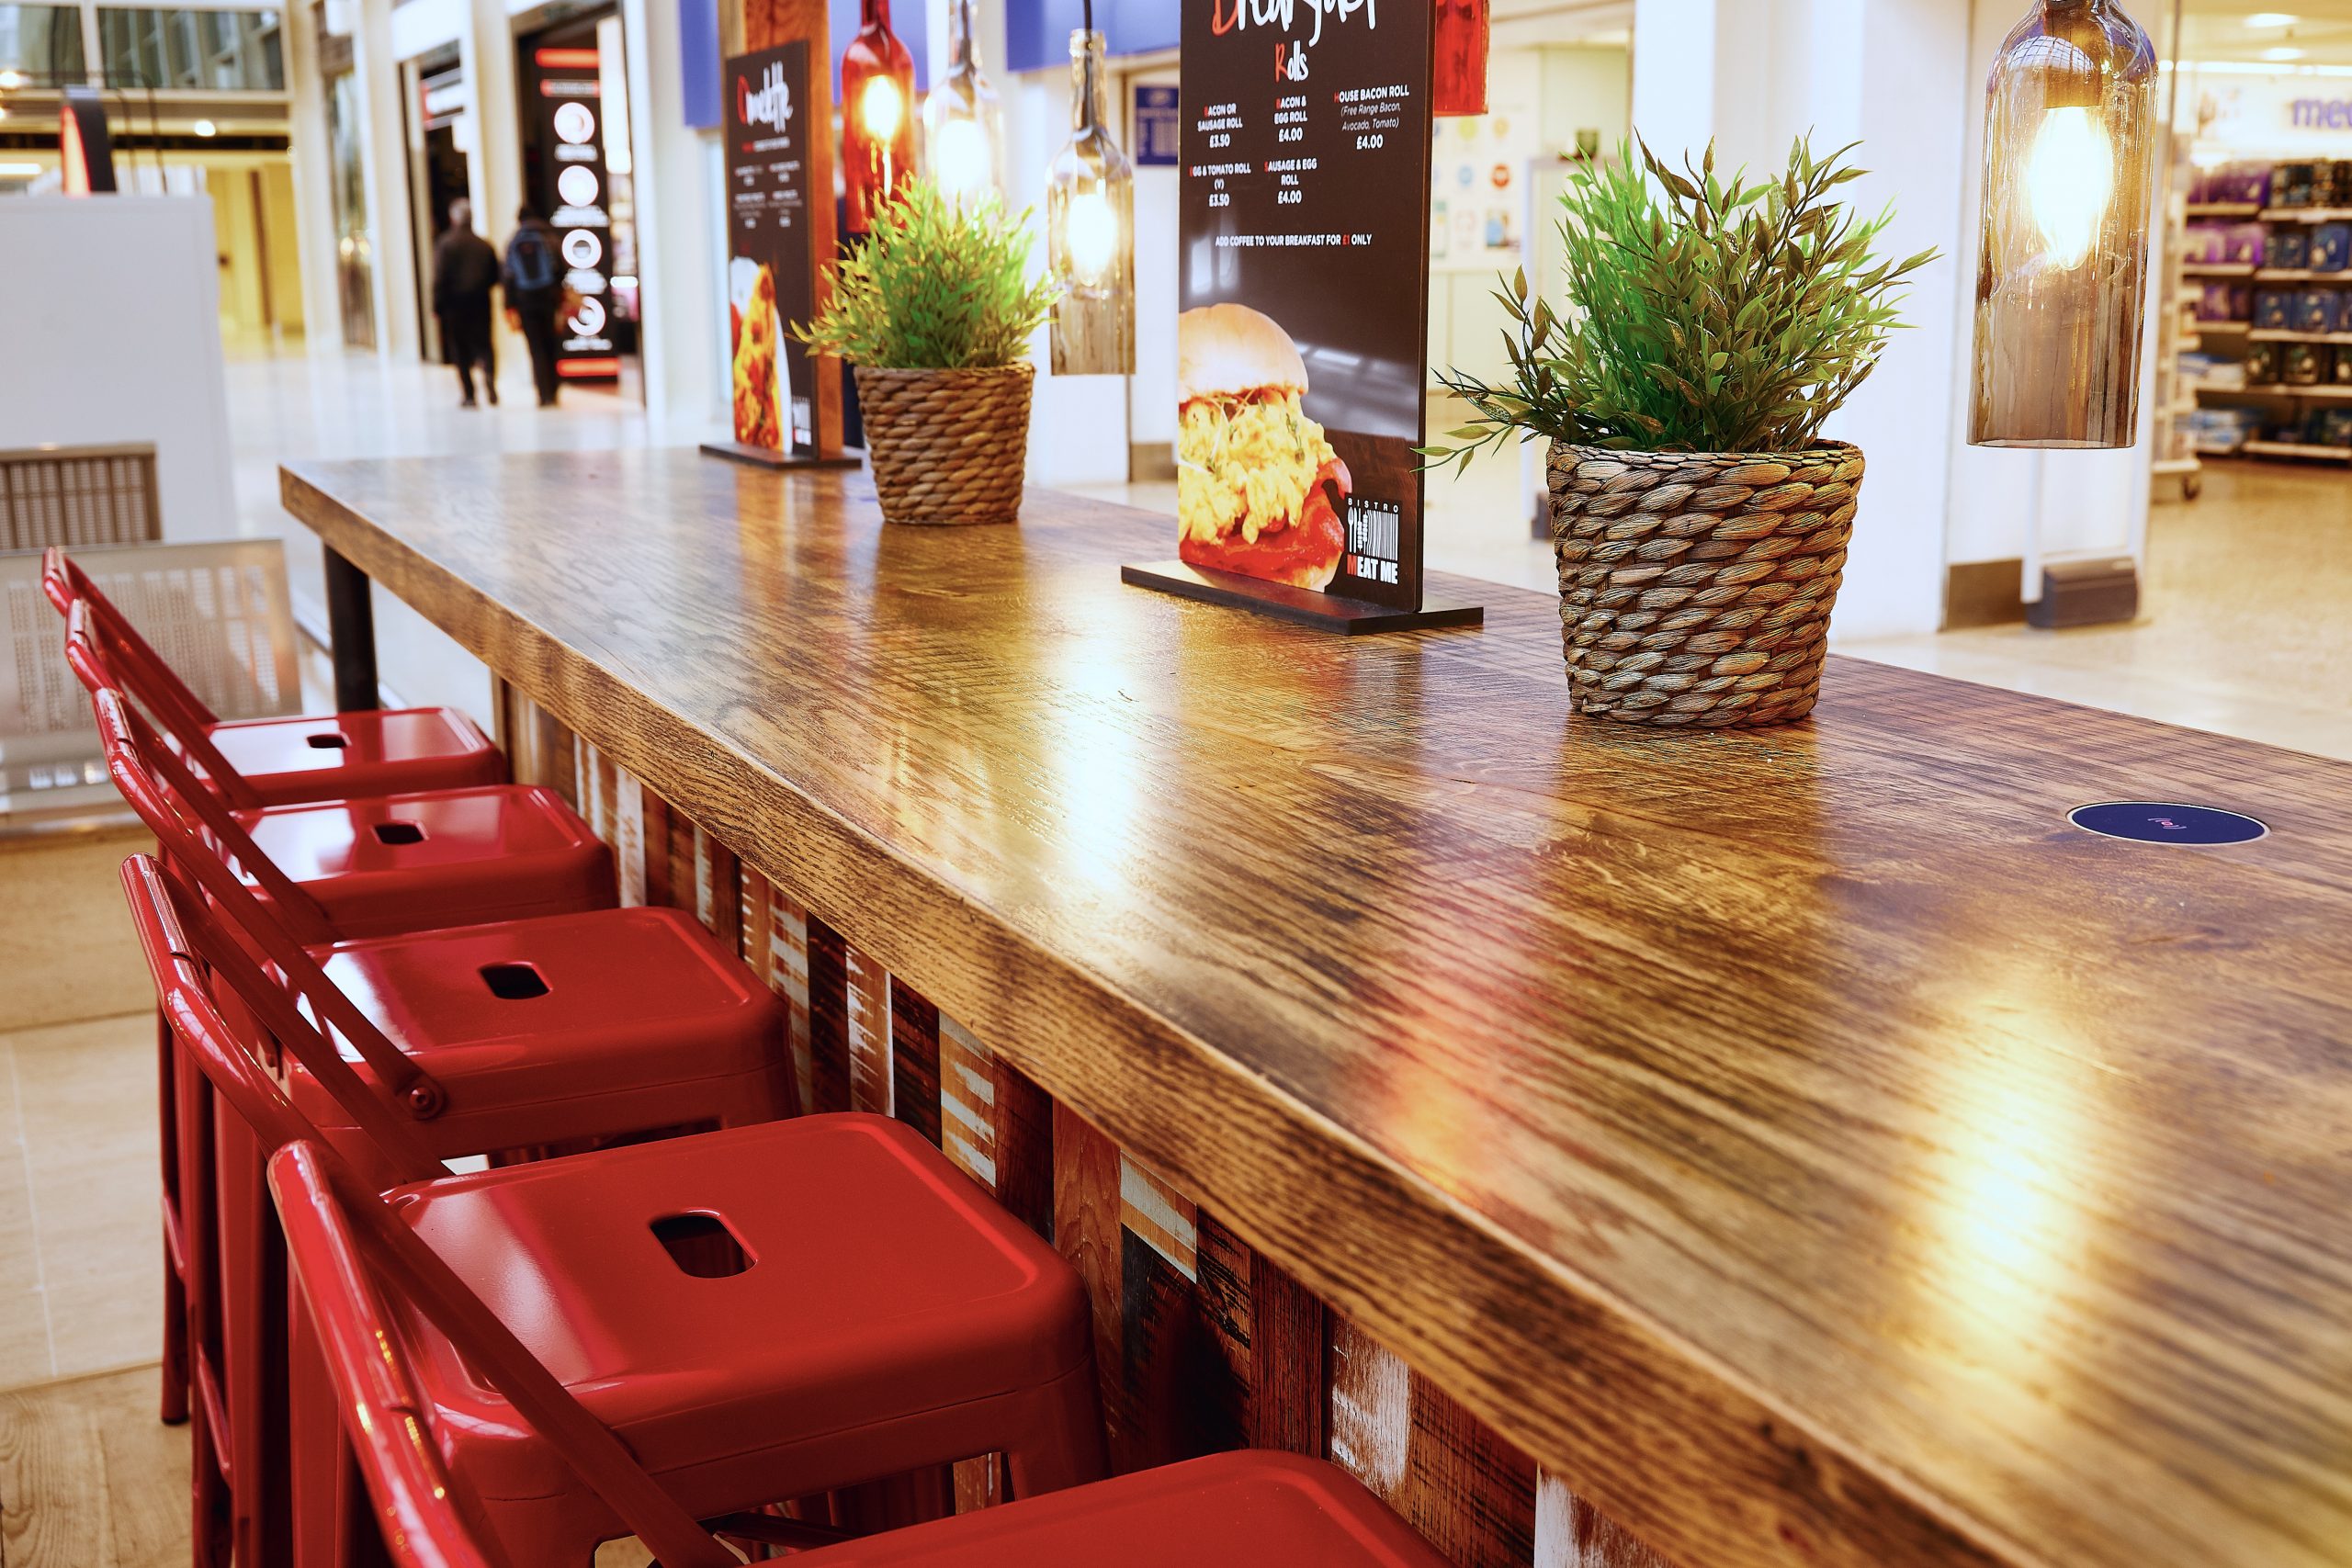 Rustic bar seating with red industrial stools